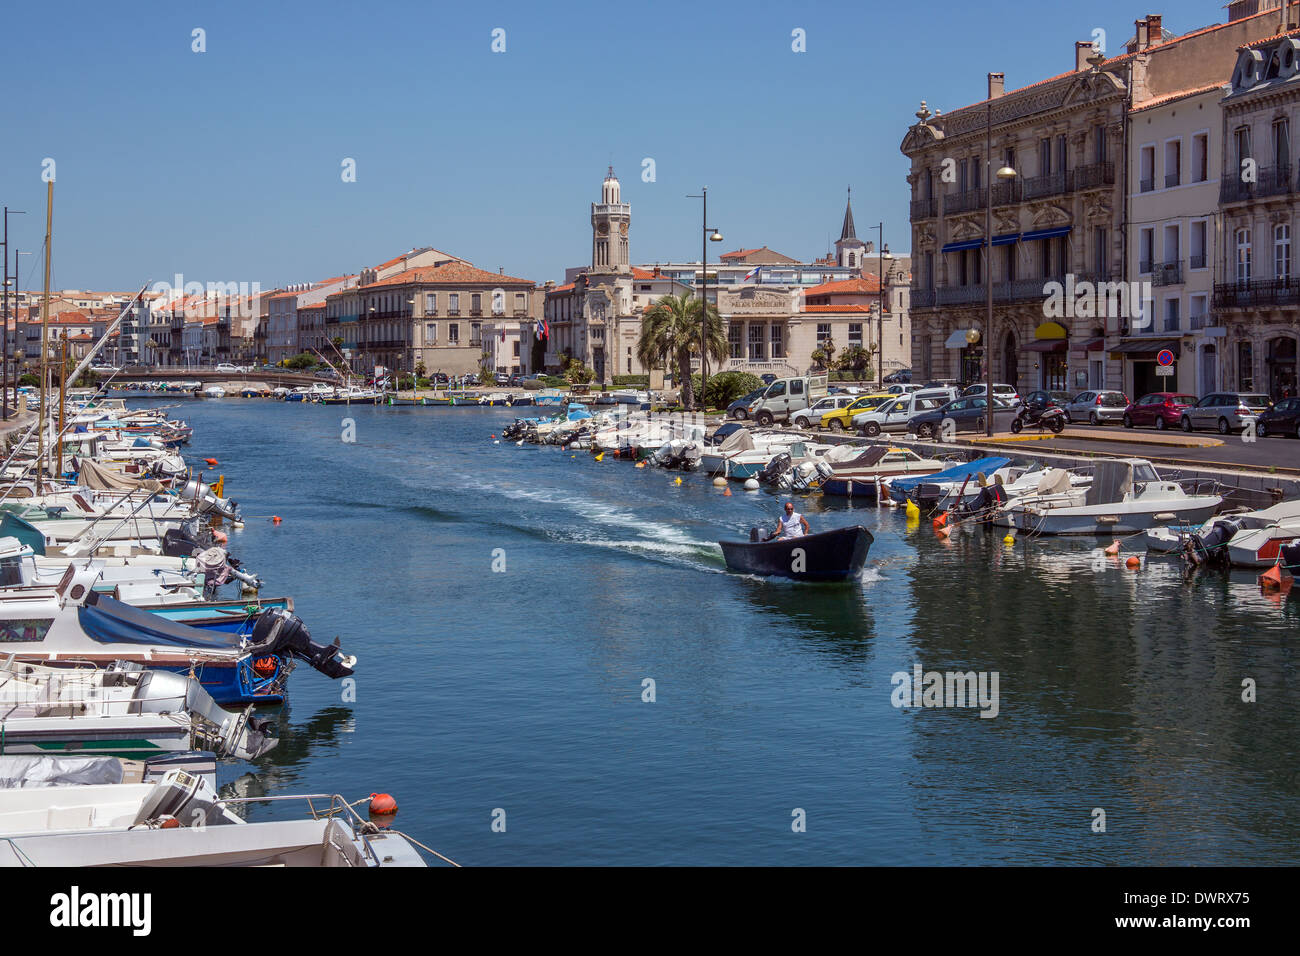 The Canal Royal in the coastal town of Sete in the Languedoc-Roussillon region of the South of France Stock Photo